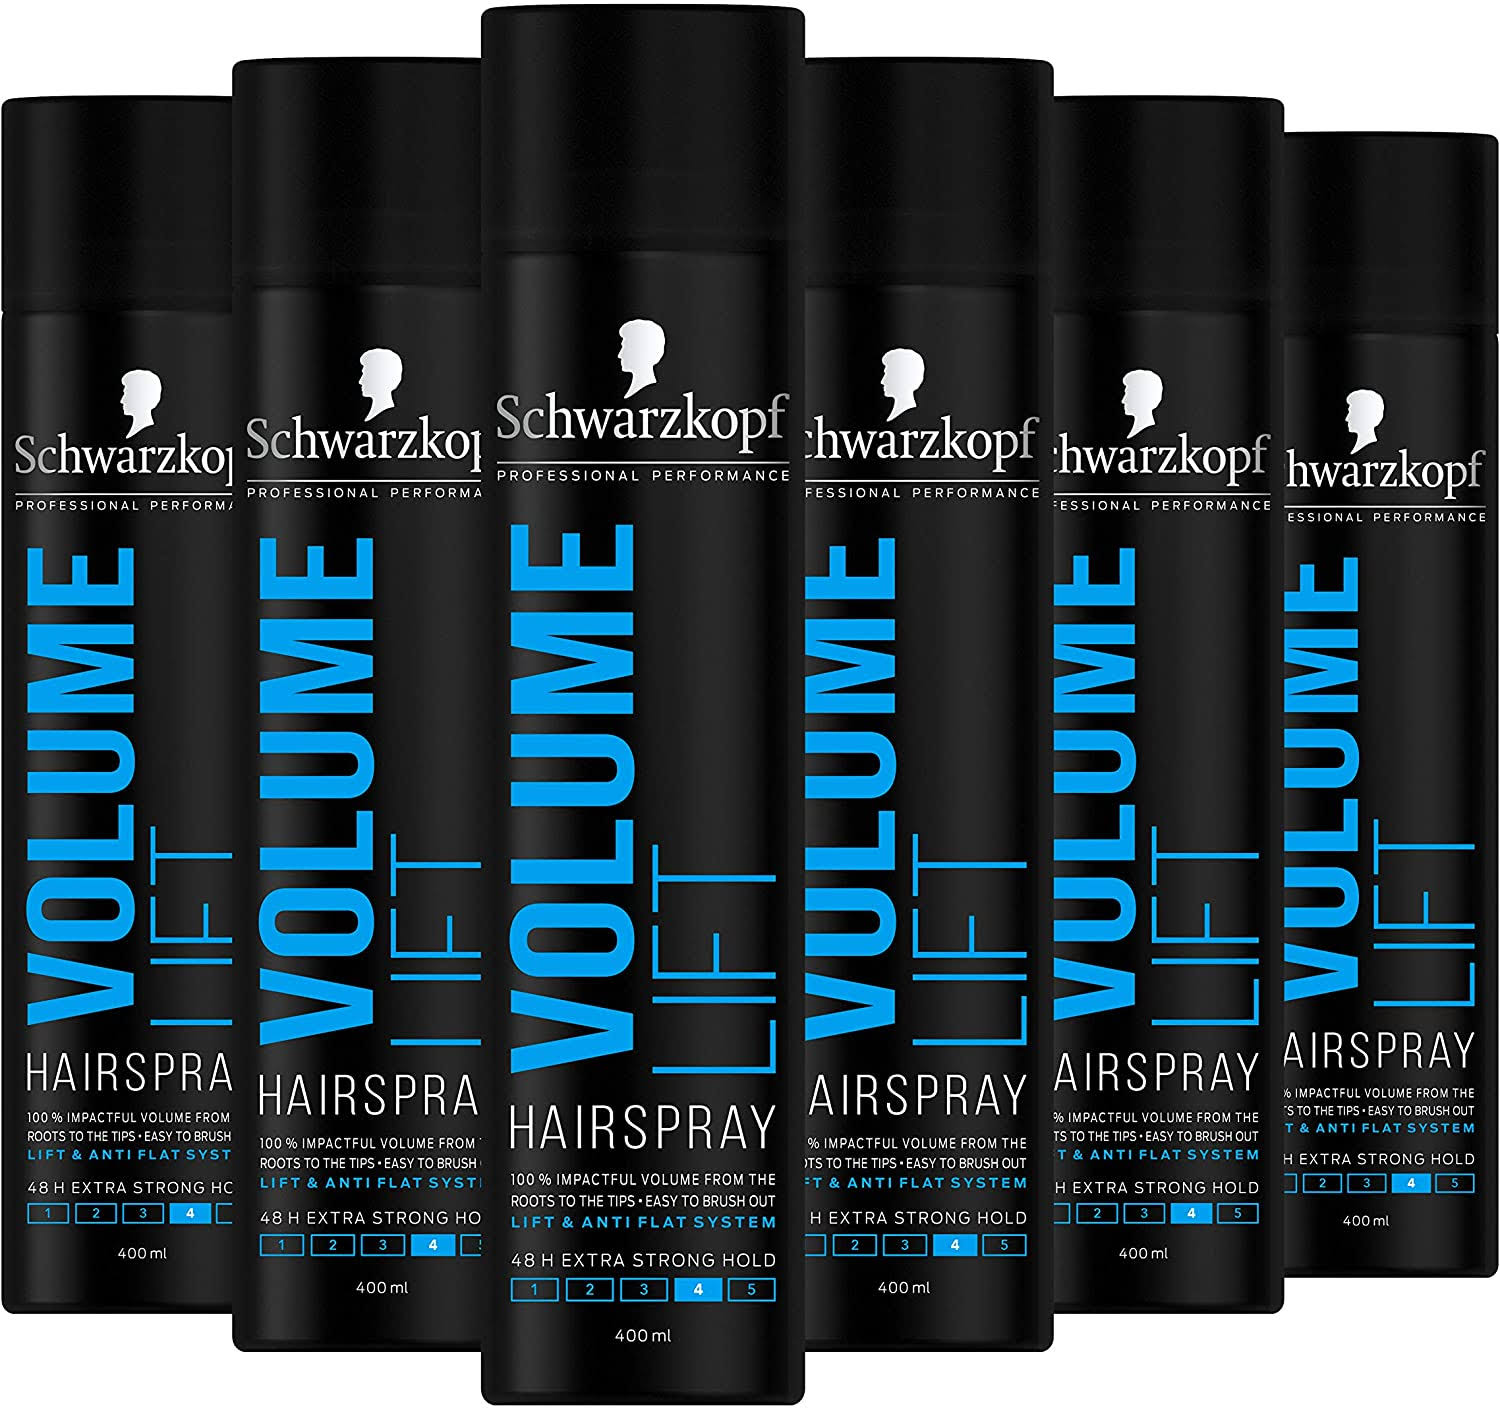 Schwarzkopf Professional Styling Volume Lift Hairspray, 48hr Extra Strong Hold, Multipack 6 x 400 ml